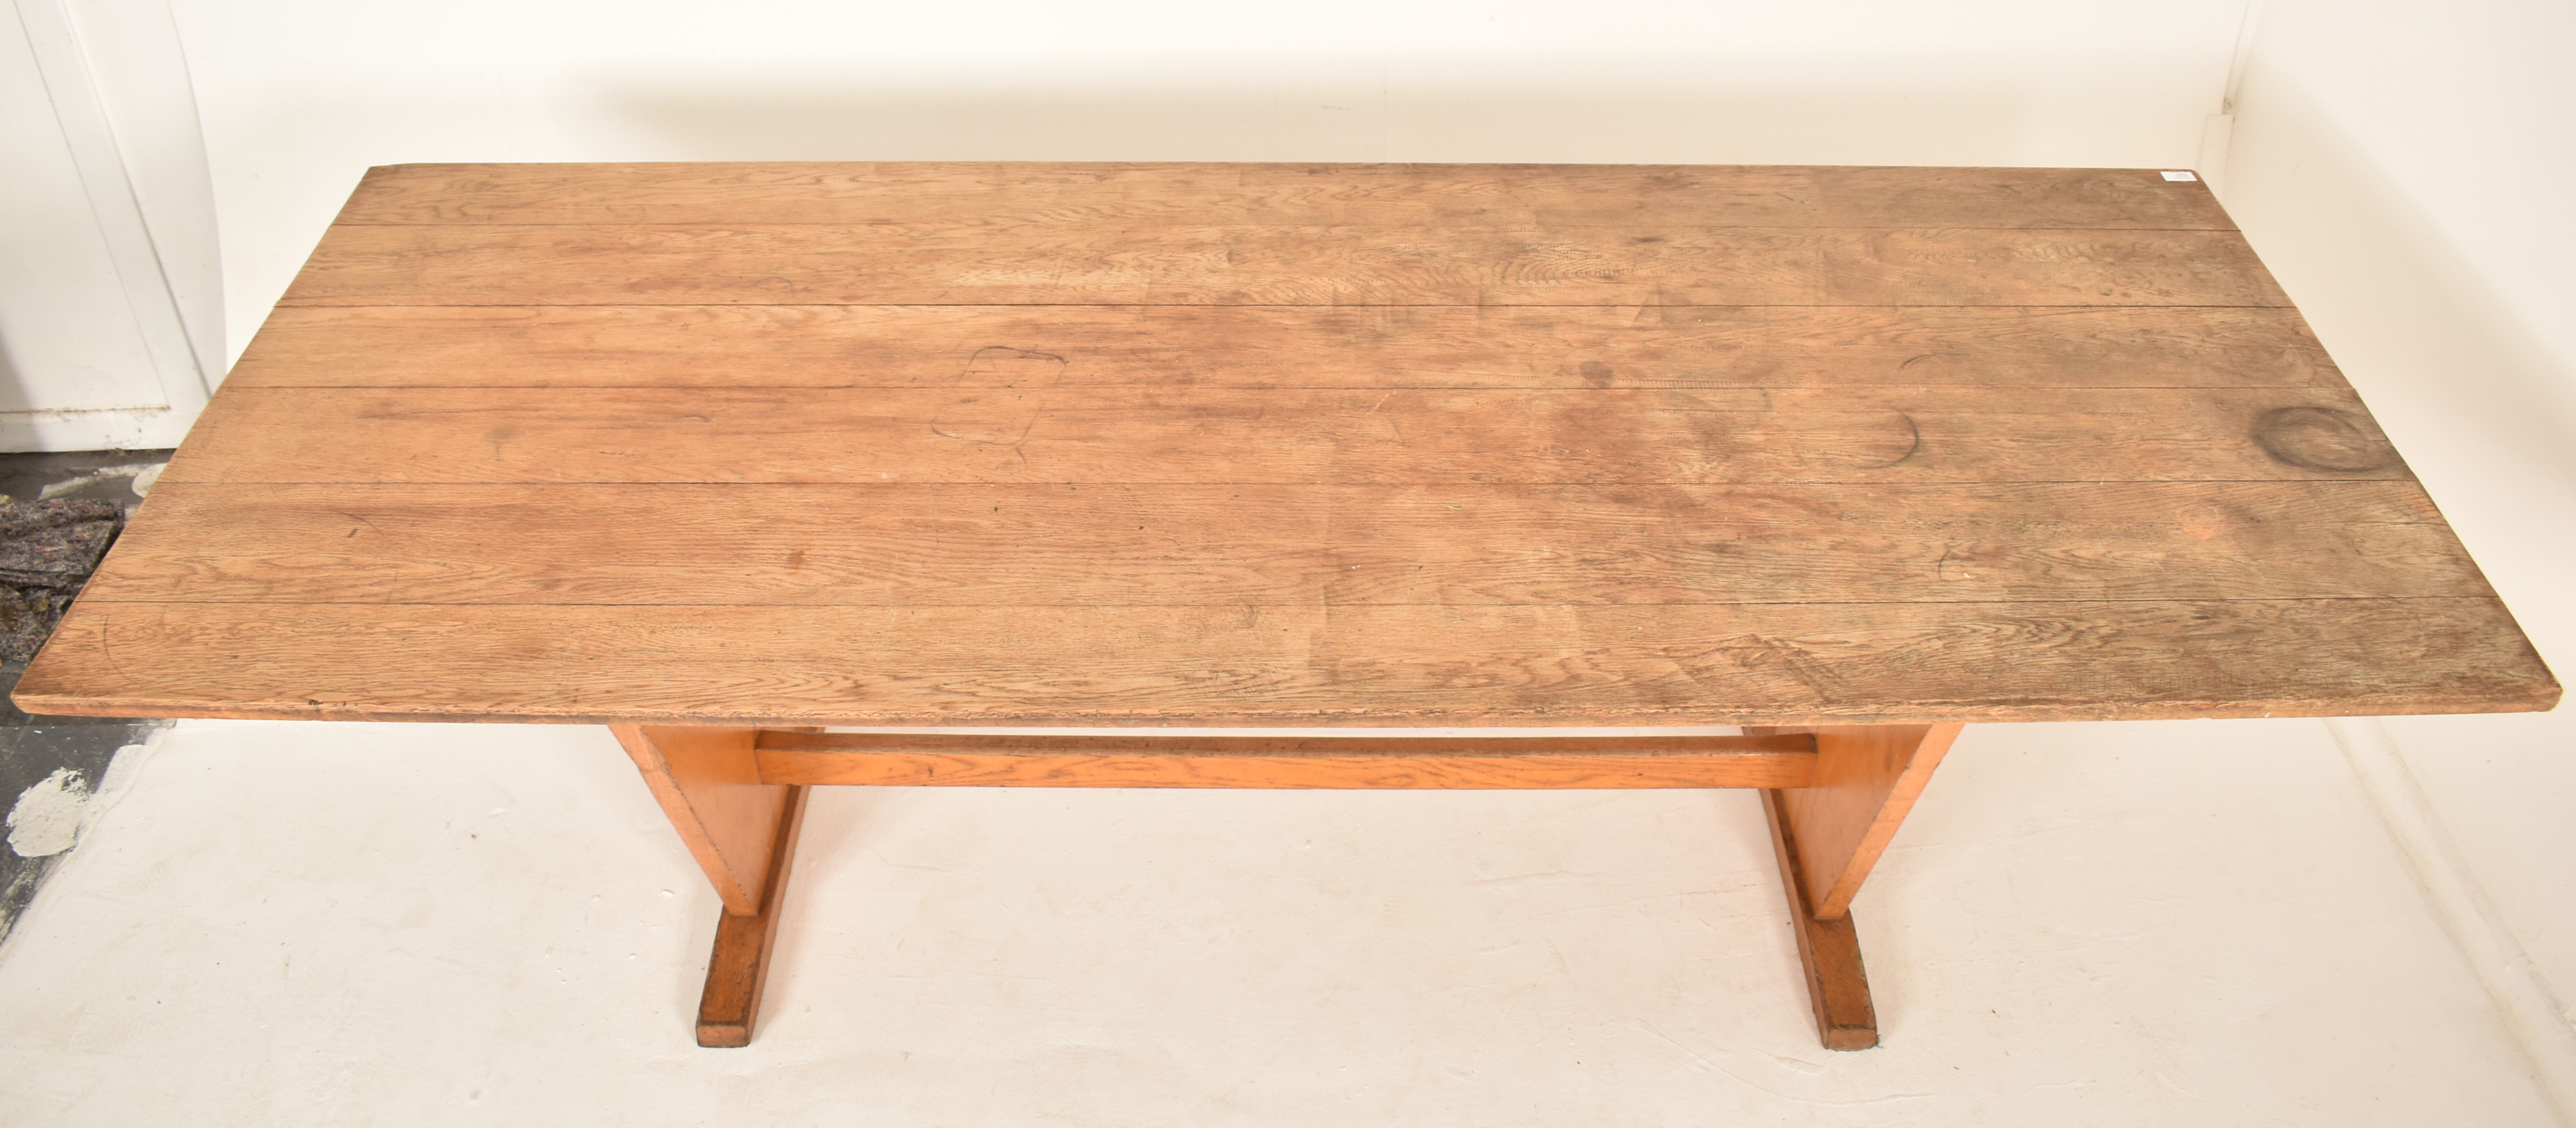 LARGE 20TH CENTURY ELM AND OAK REFECTORY DINING TABLE - Image 2 of 5